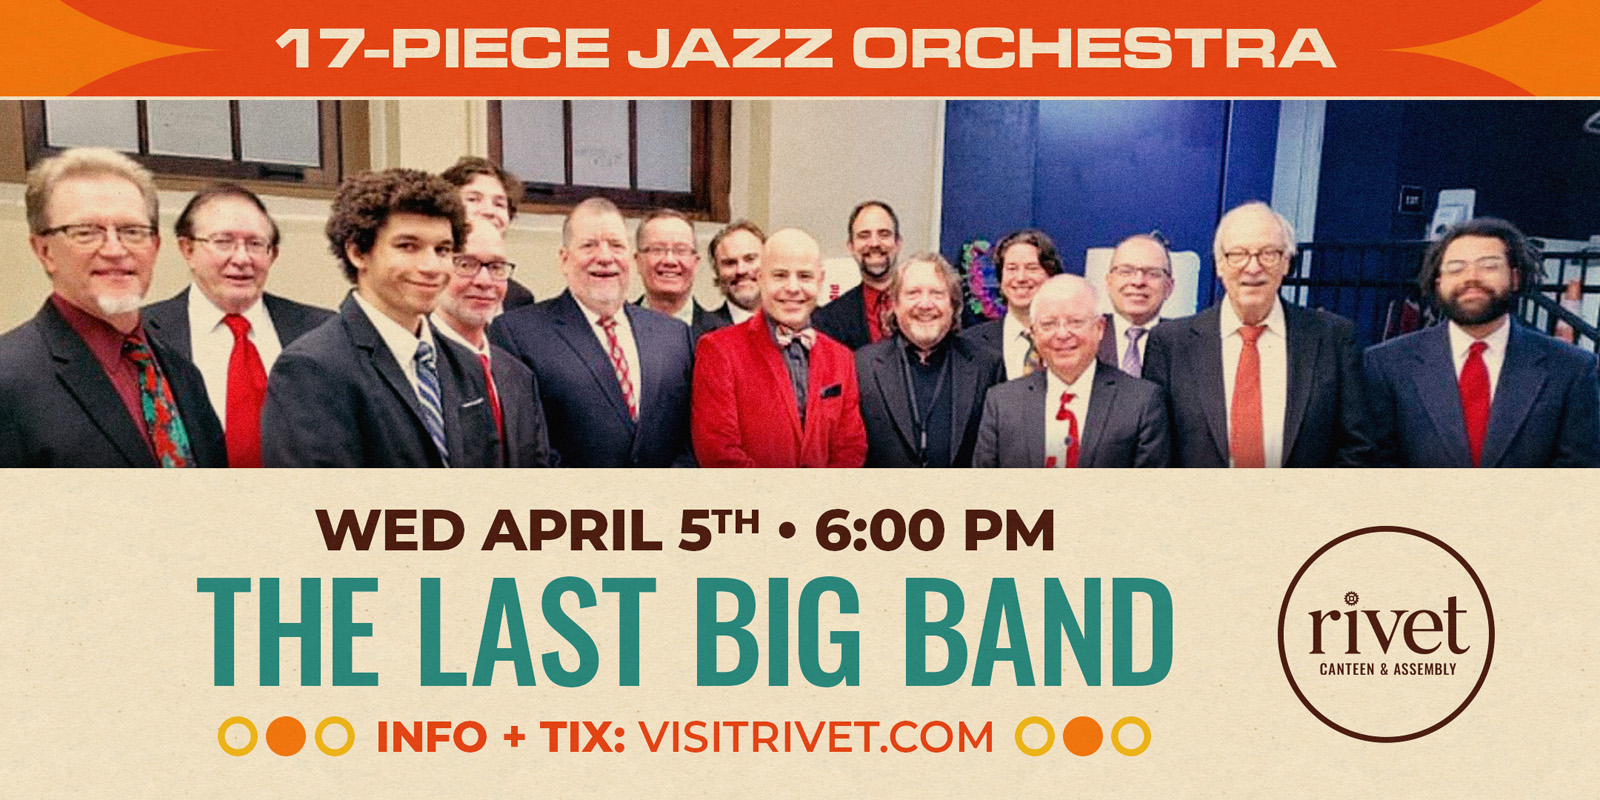 Join us on Wednesday, April 5th, 2023, as The Last Big Band will be performing live at Rivet: Canteen & Assembly once again!